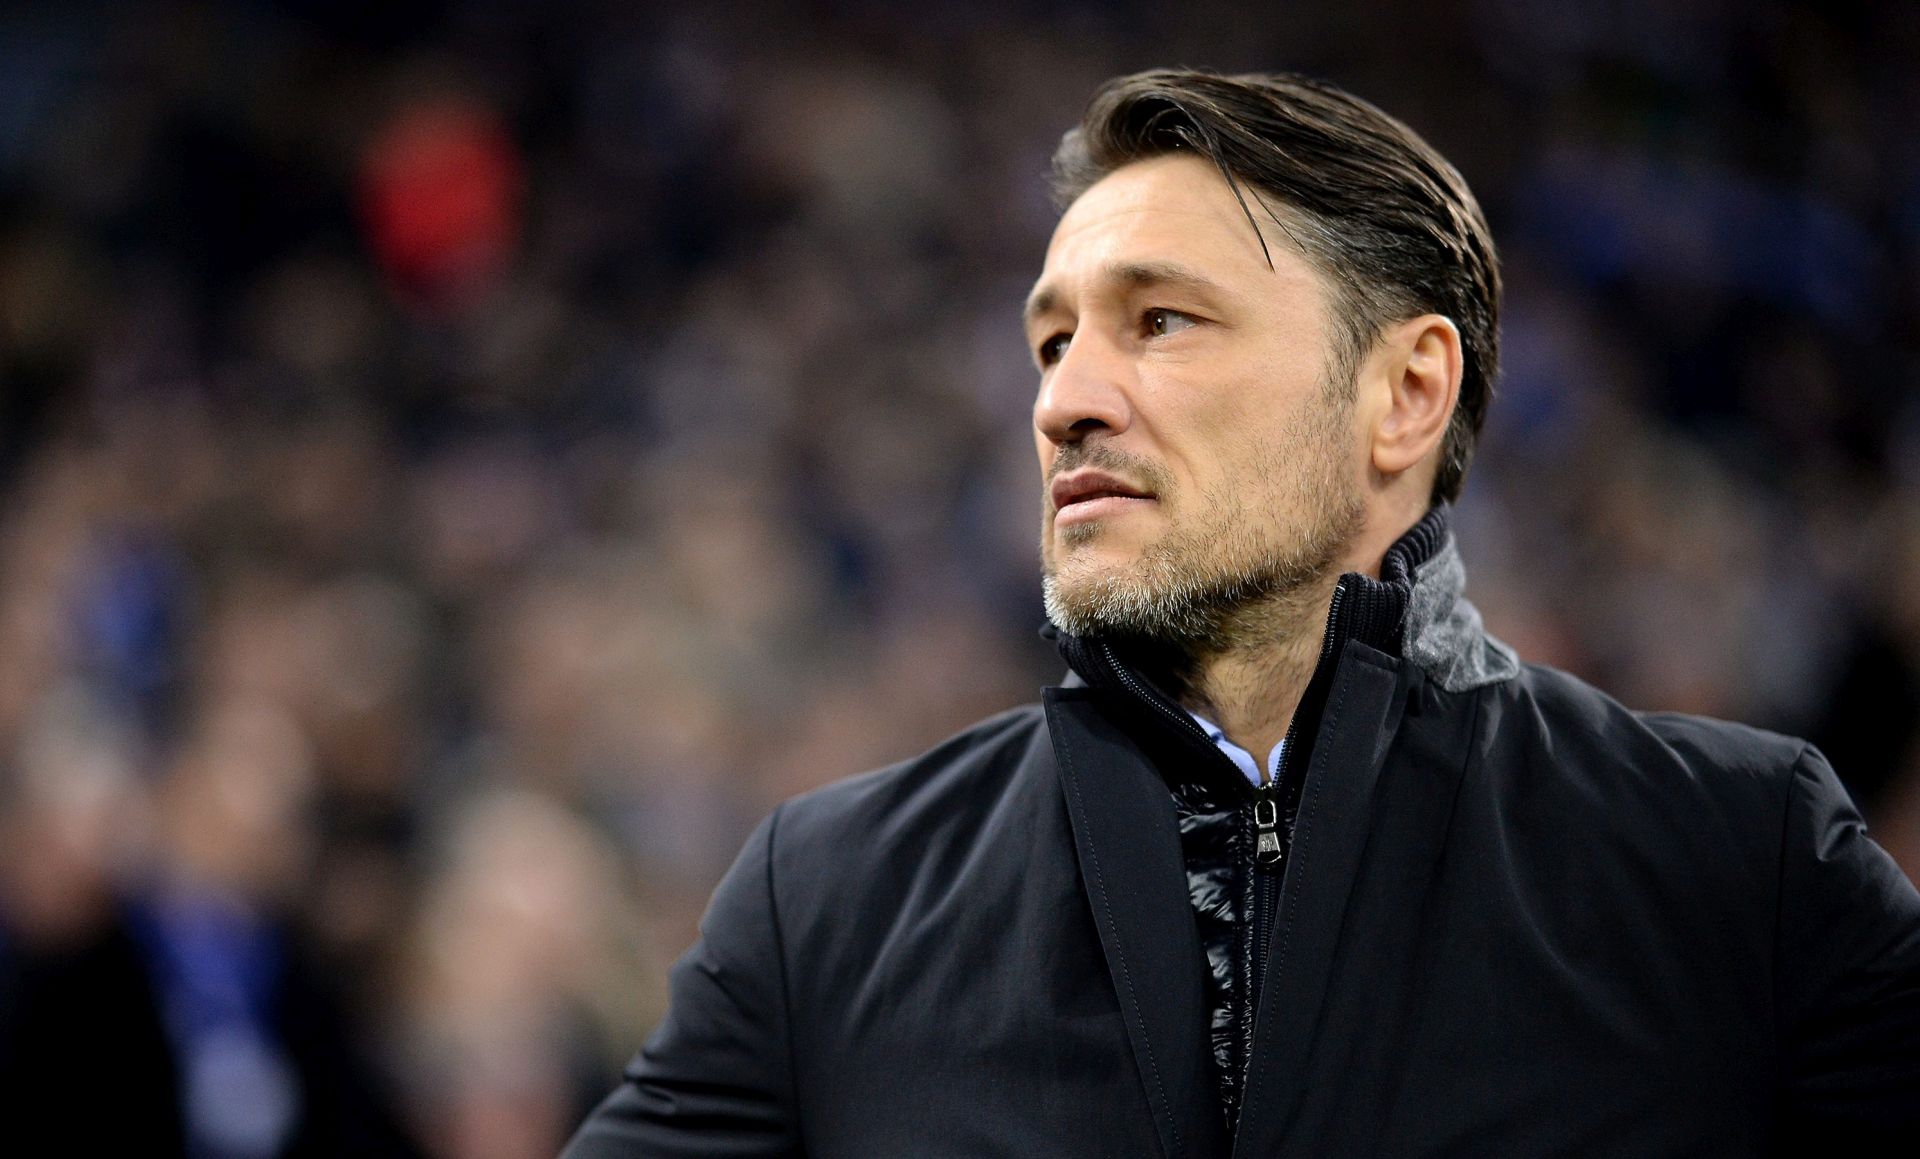 epa05755273 Frankfurts head coach Niko Kovac looks on during the German Bundesliga soccer match between FC Schalke 04 and Eintracht Frankfurt in Gelsenkirchen, Germany, 27 January 2017.  EPA/SASCHA STEINBACH EMBARGO CONDITIONS - ATTENTION: Due to the accreditation guidelines, the DFL only permits the publication and utilisation of up to 15 pictures per match on the internet and in online media during the match.